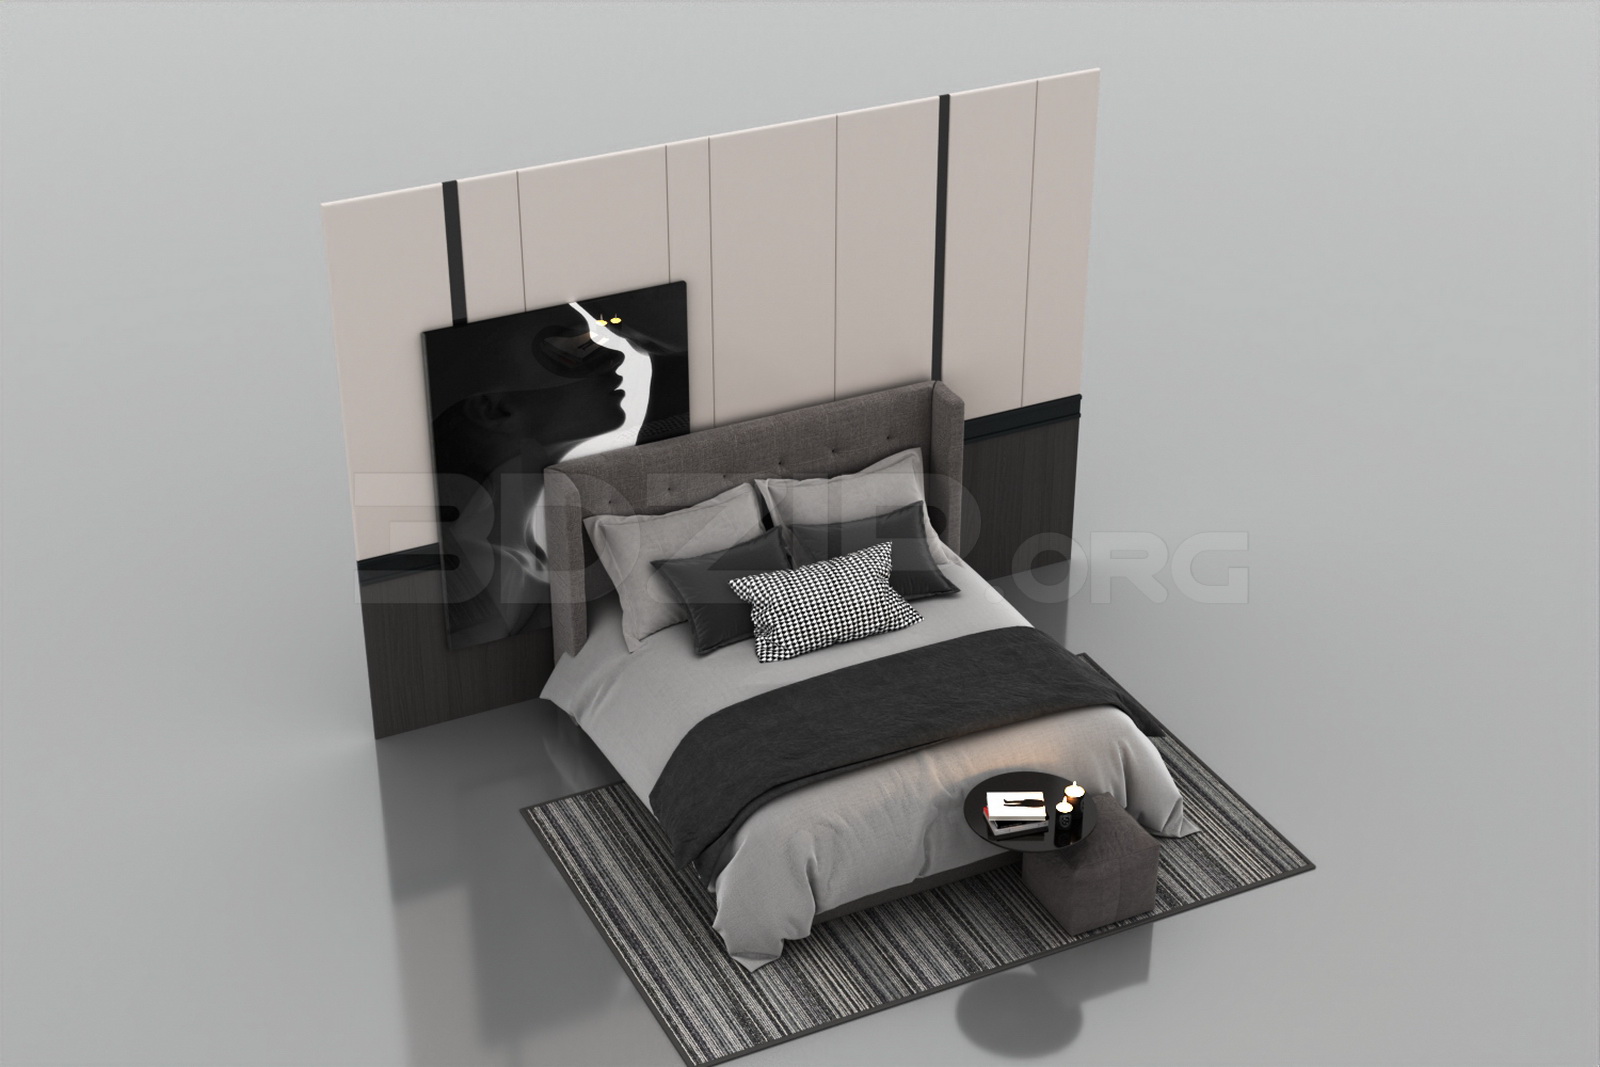 703. Download Free Bed Model By Viet Long Lee